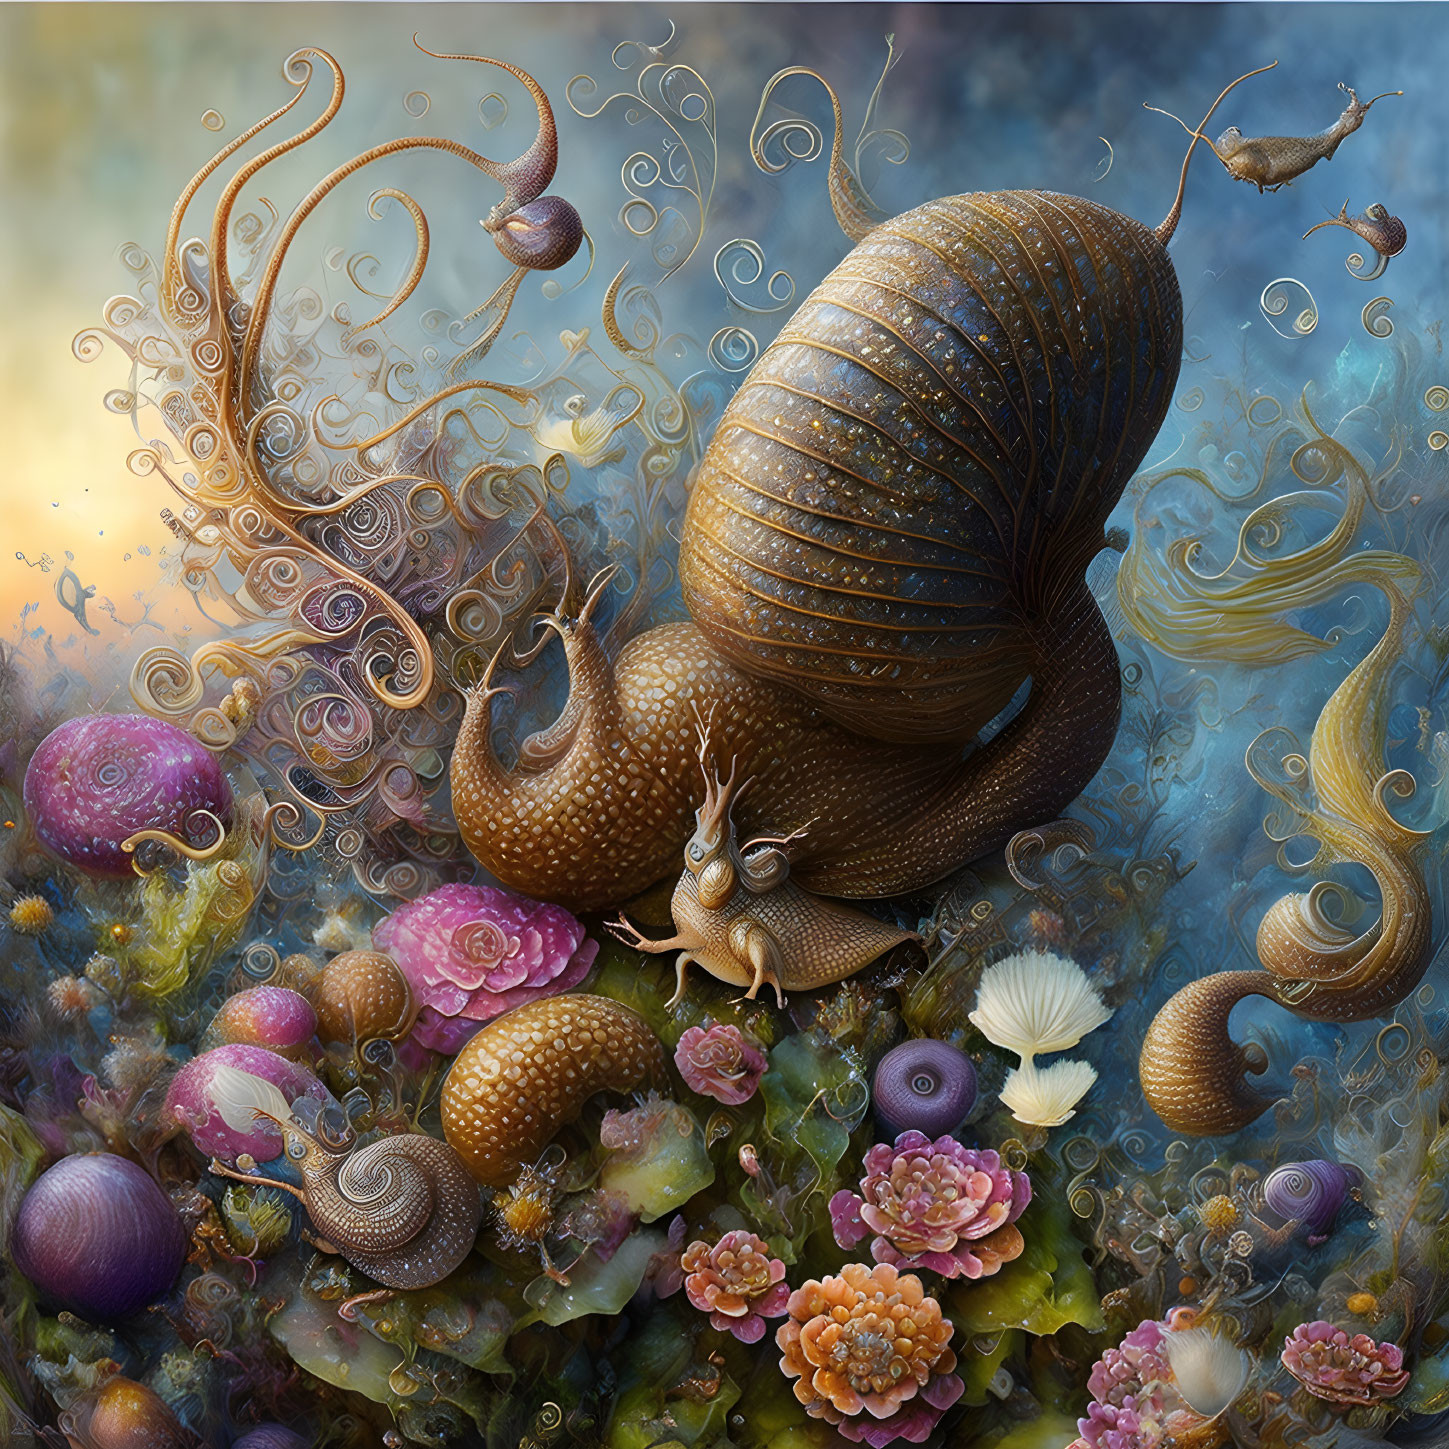 Colorful Snail with Ornate Shell in Whimsical Landscape